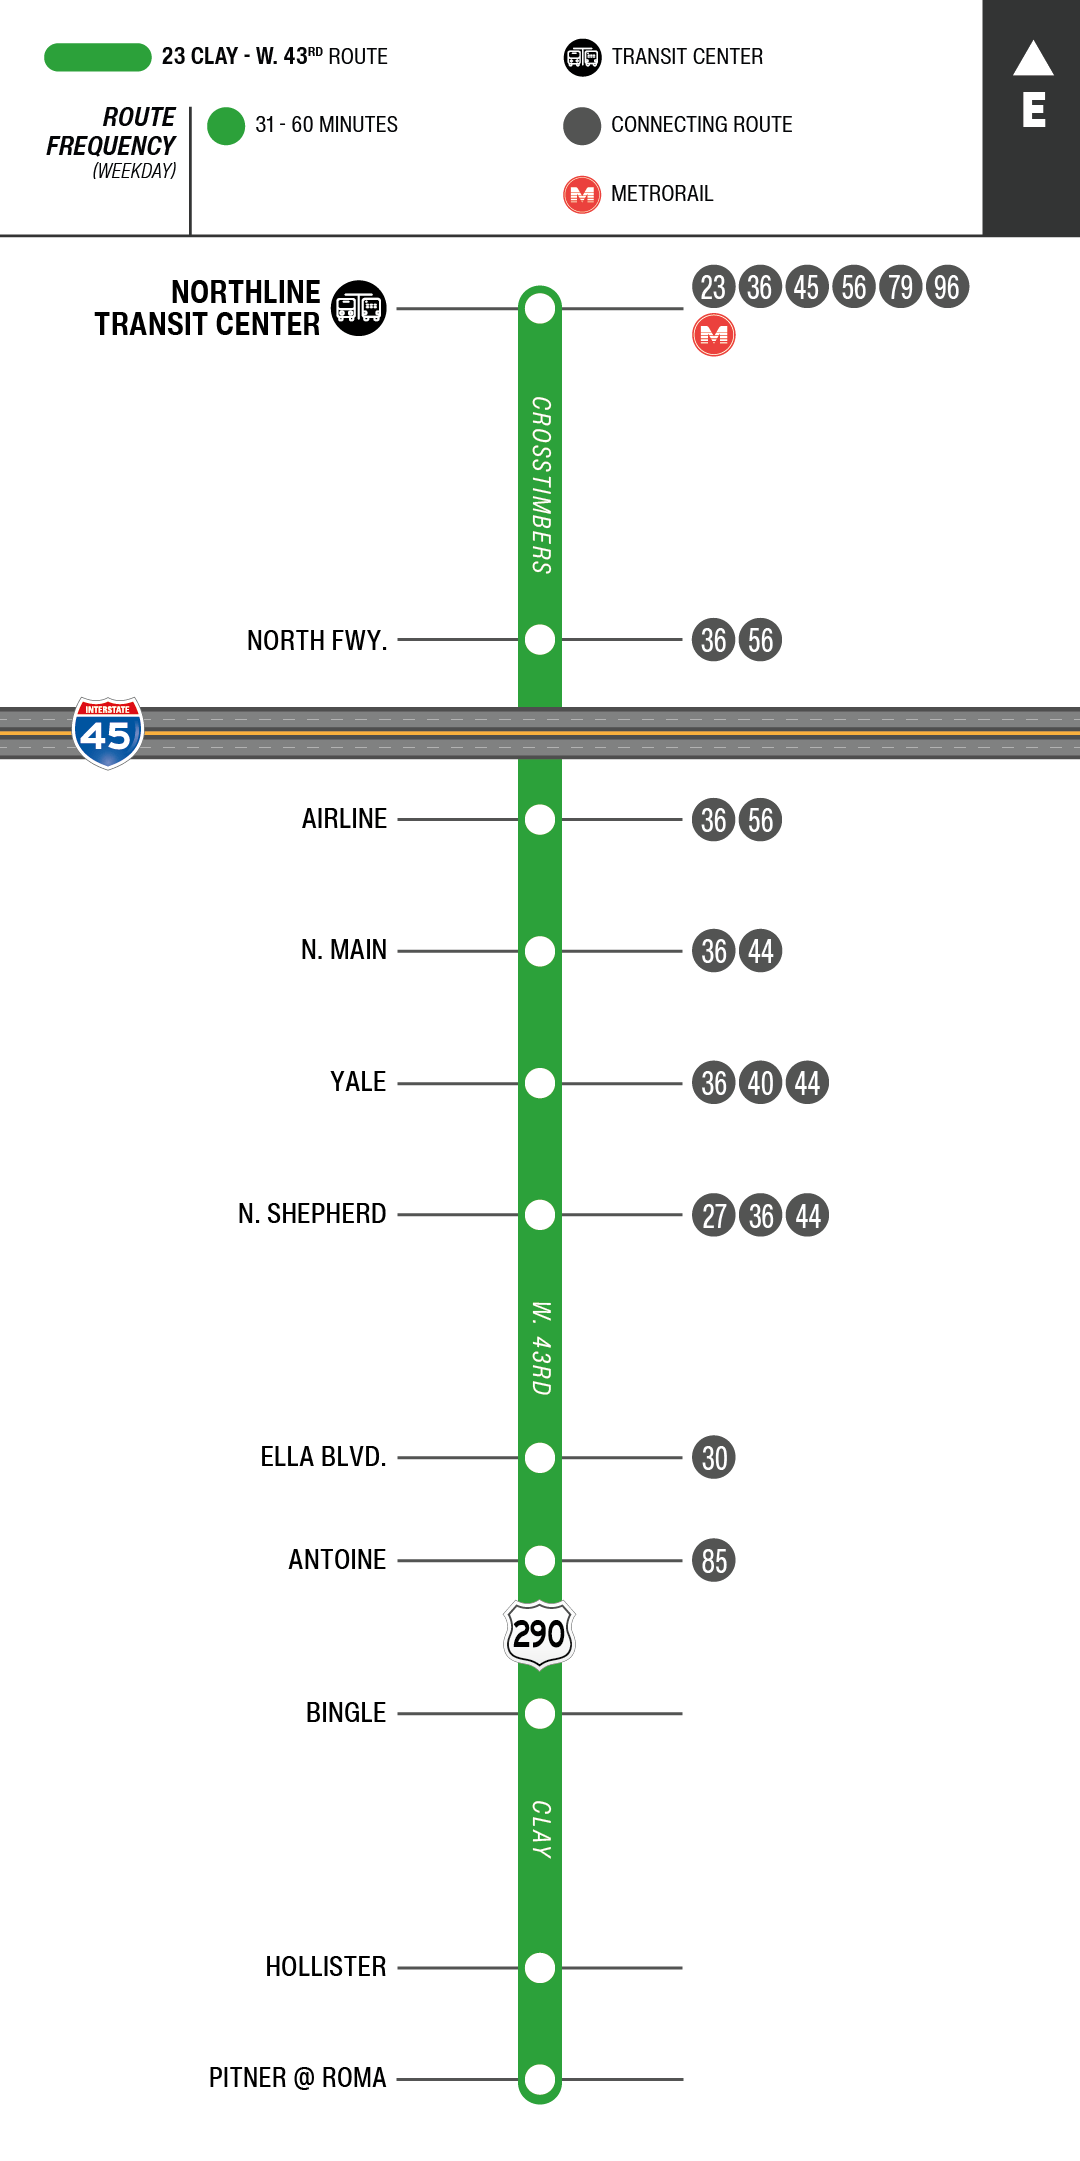 Route map for 23 Clay / West 43rd bus